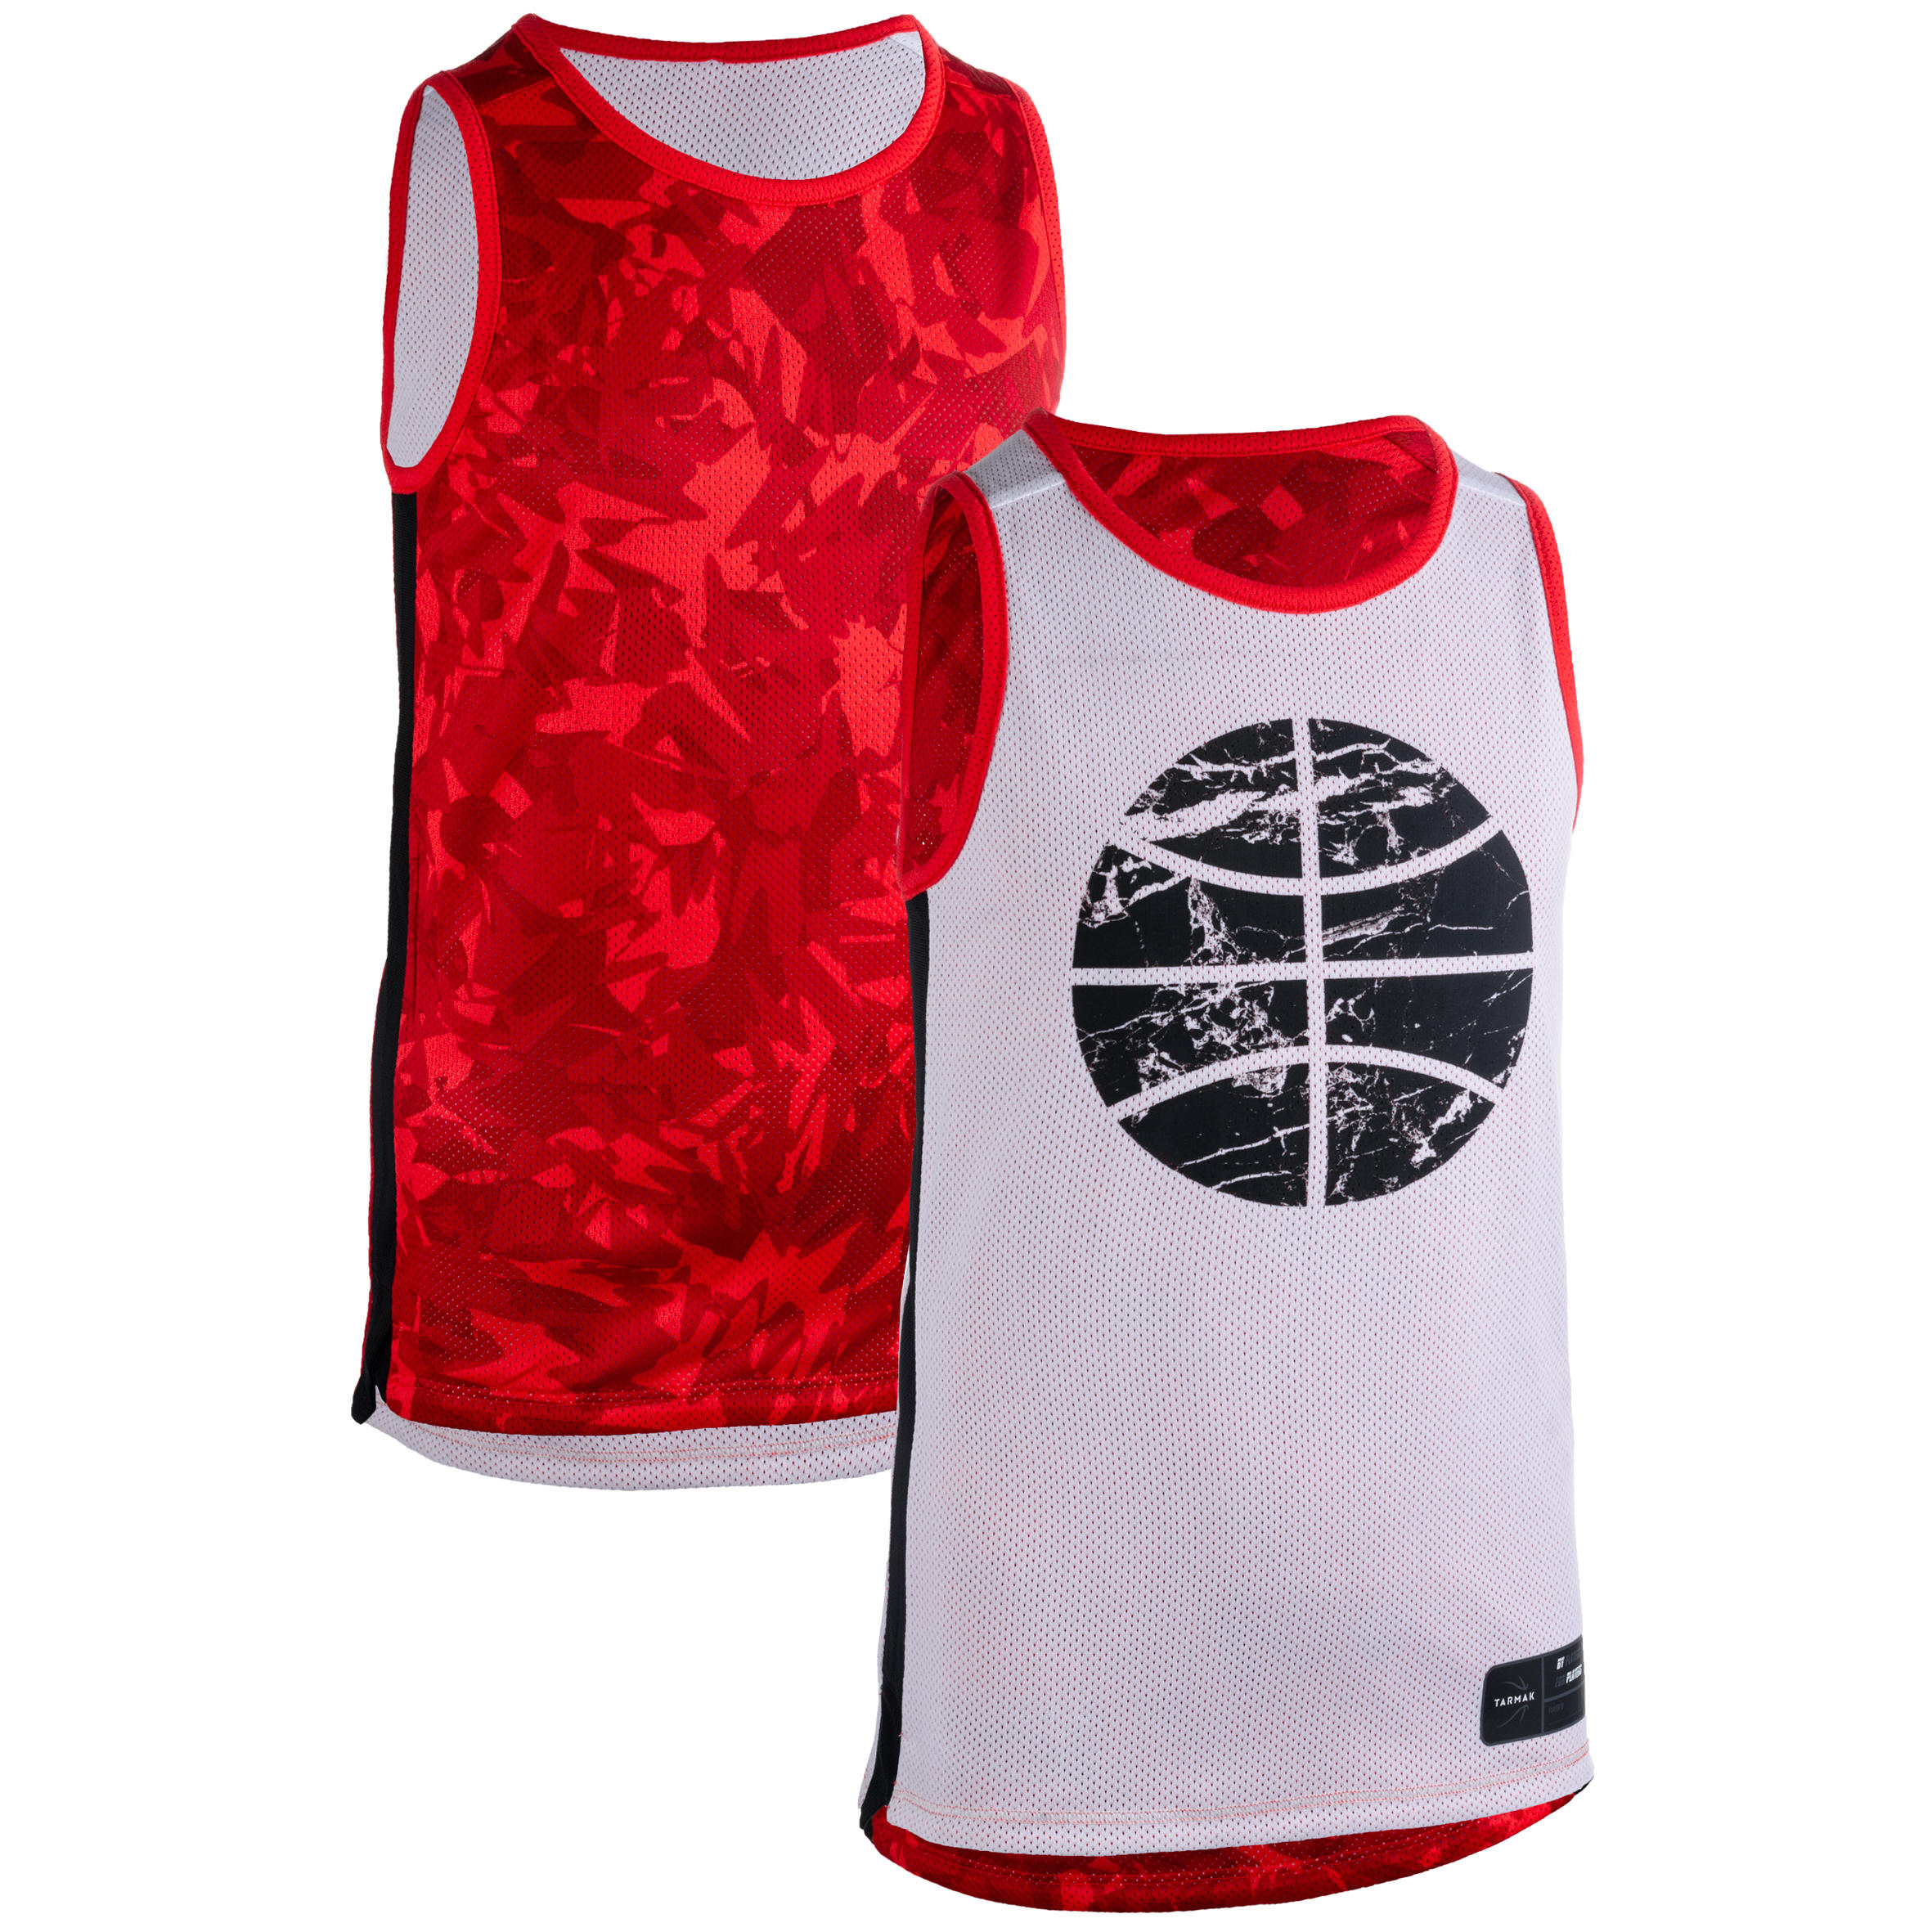 red and white reversible basketball jersey